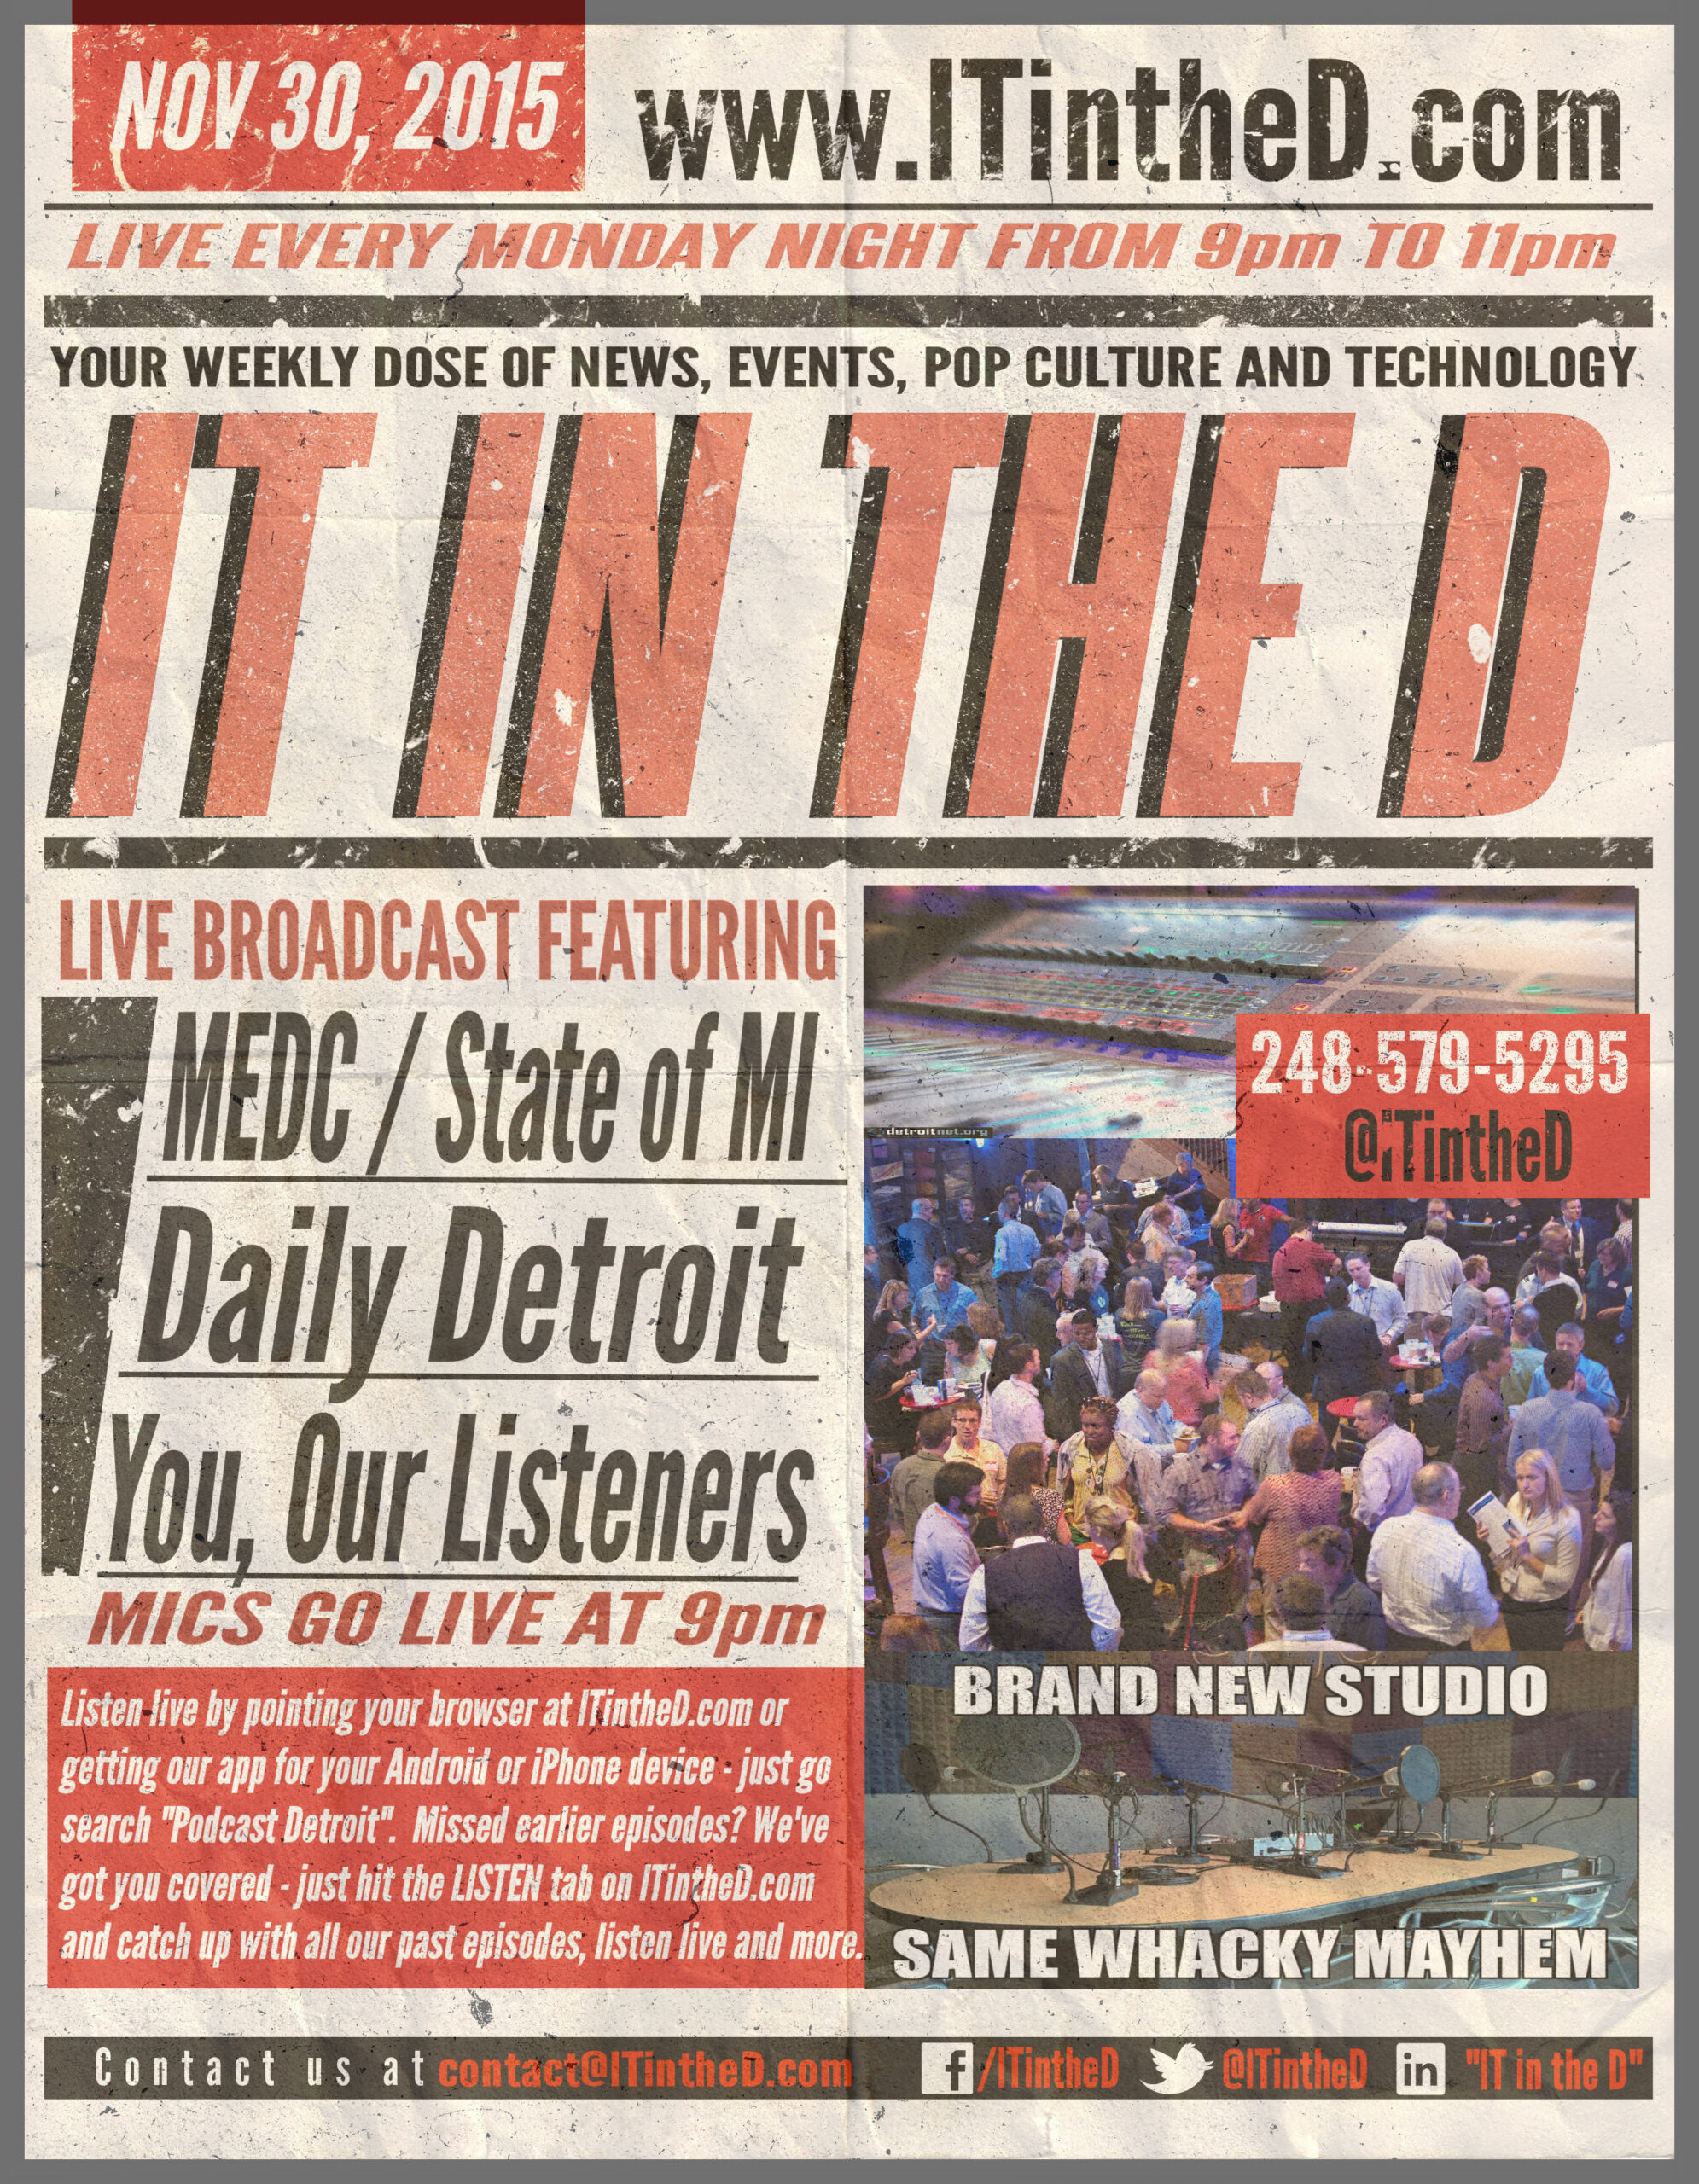 State of Michigan, Daily Detroit Tonight, Our Big Event Next Week and More for 11/30/2015